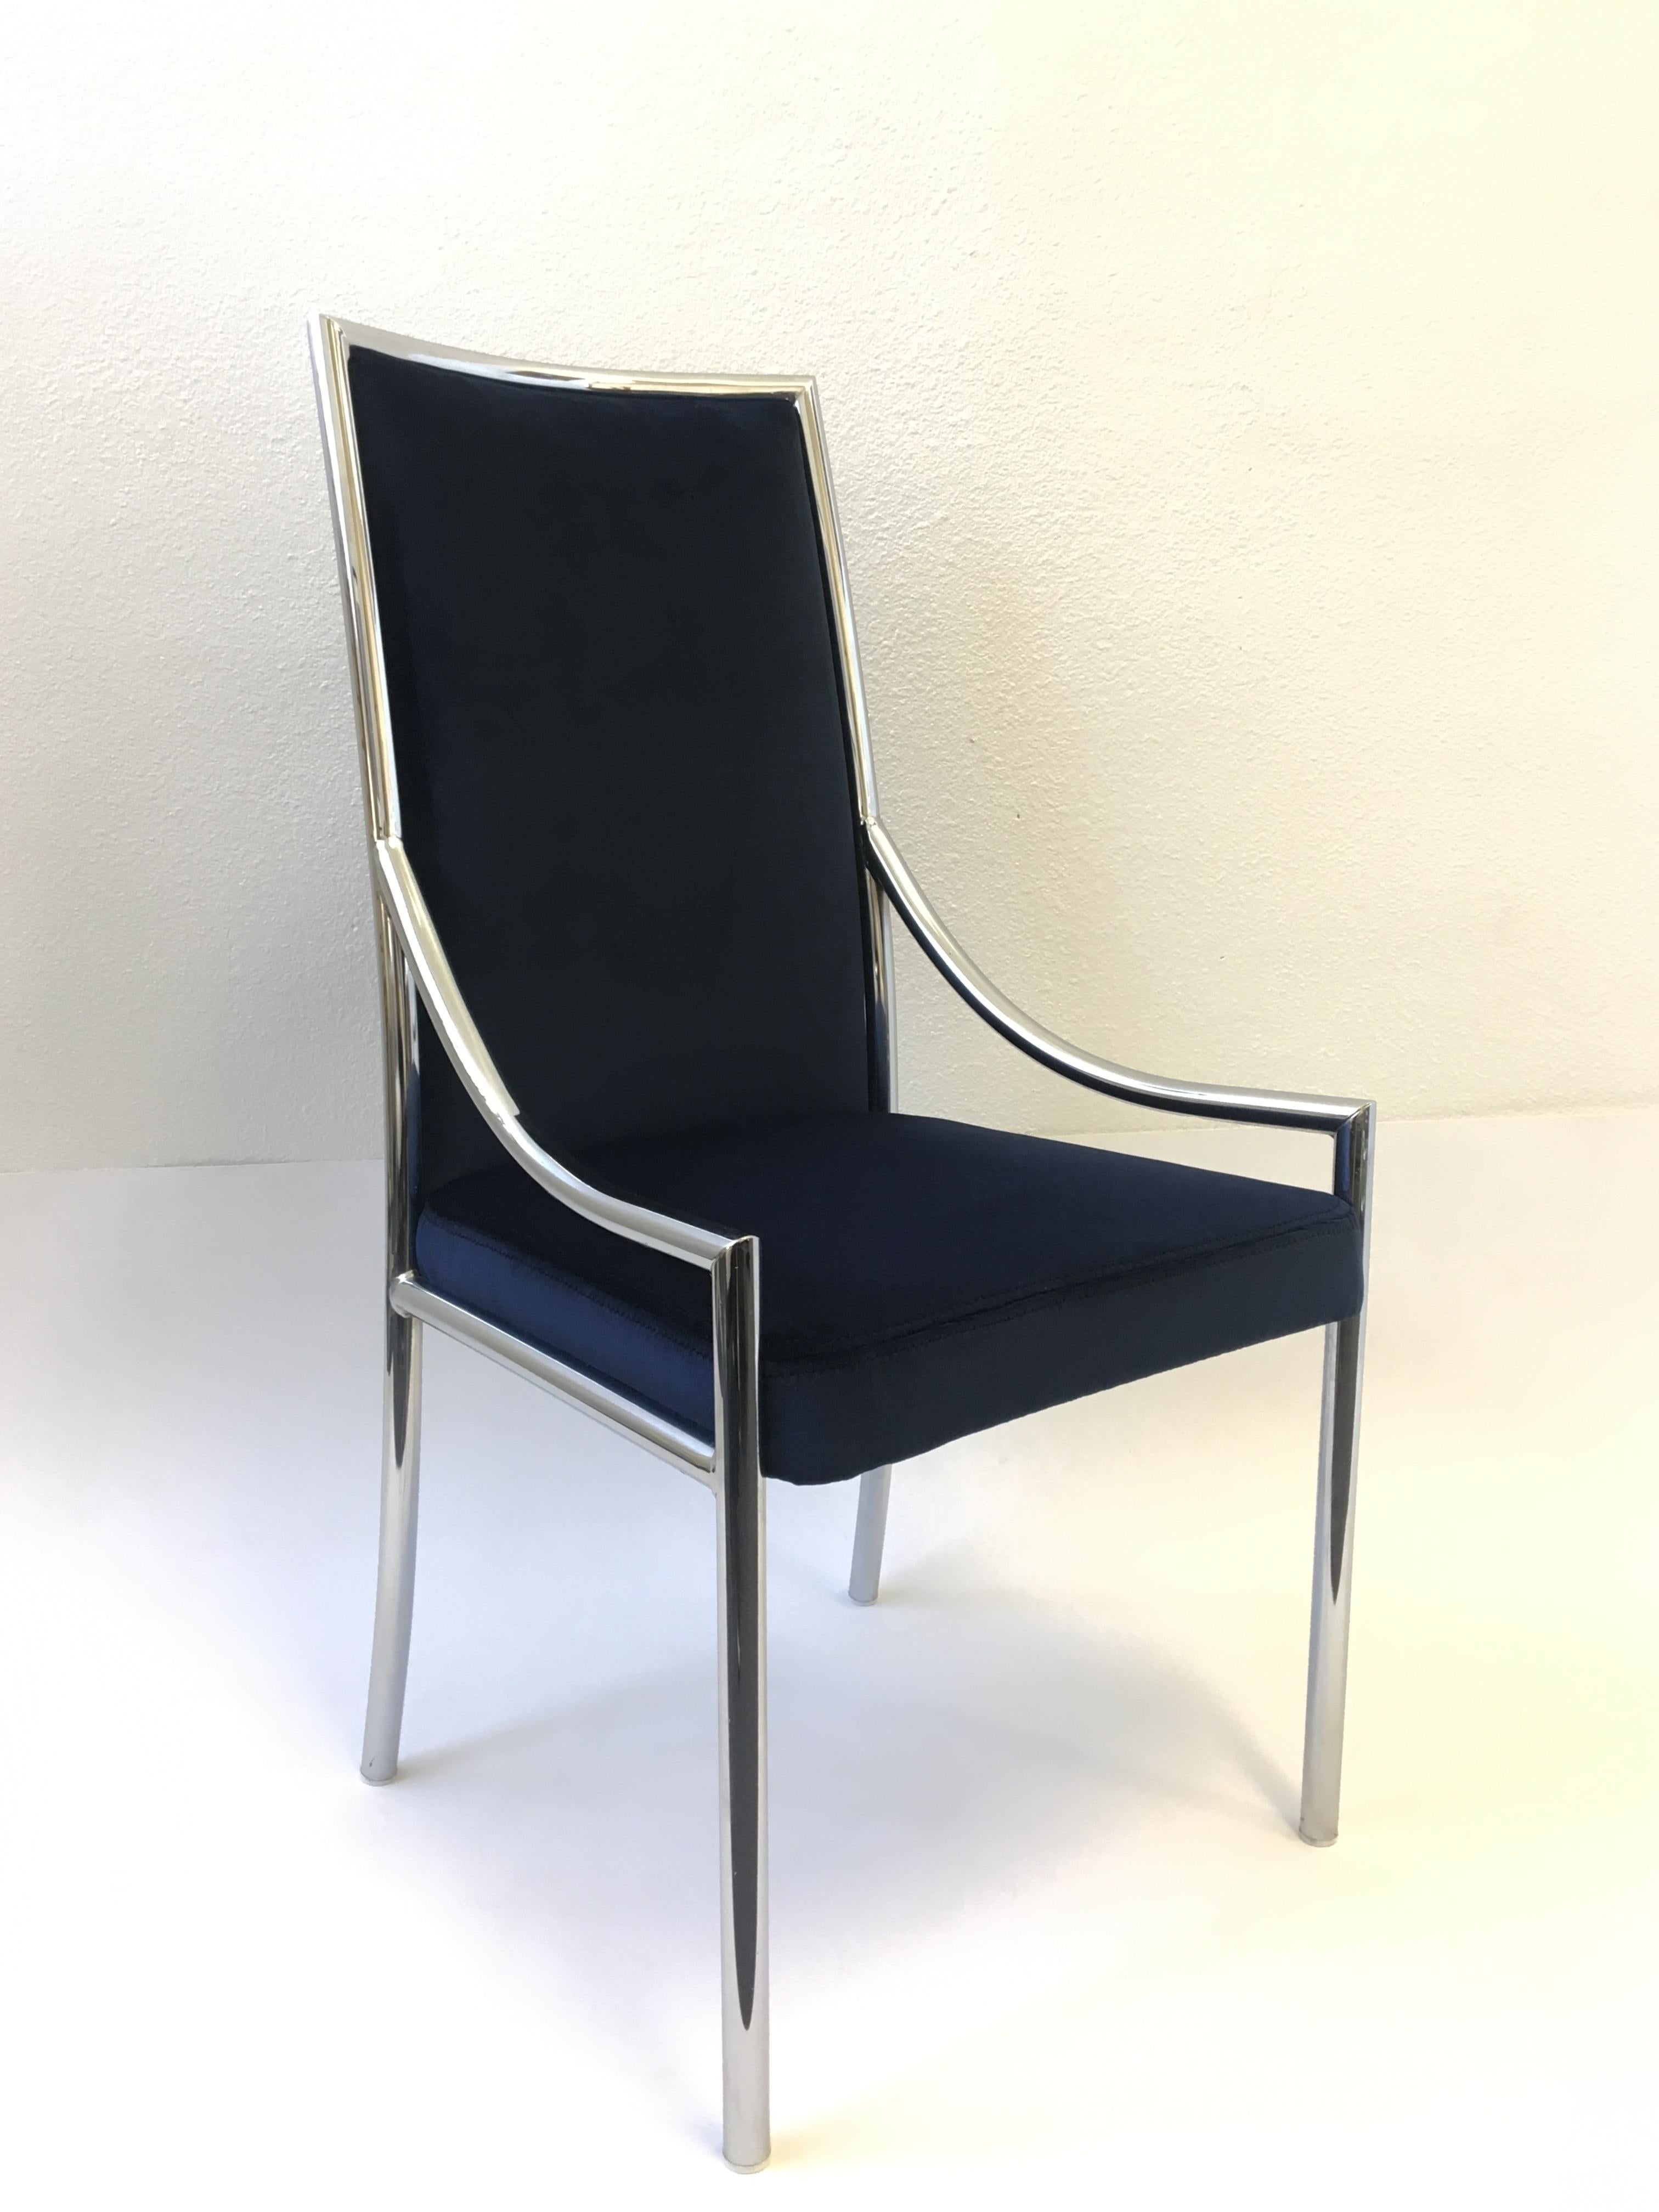 American Set of Ten Chrome and Royal Blue Velvet Dining Chair Attributed to Pierre Cardin For Sale